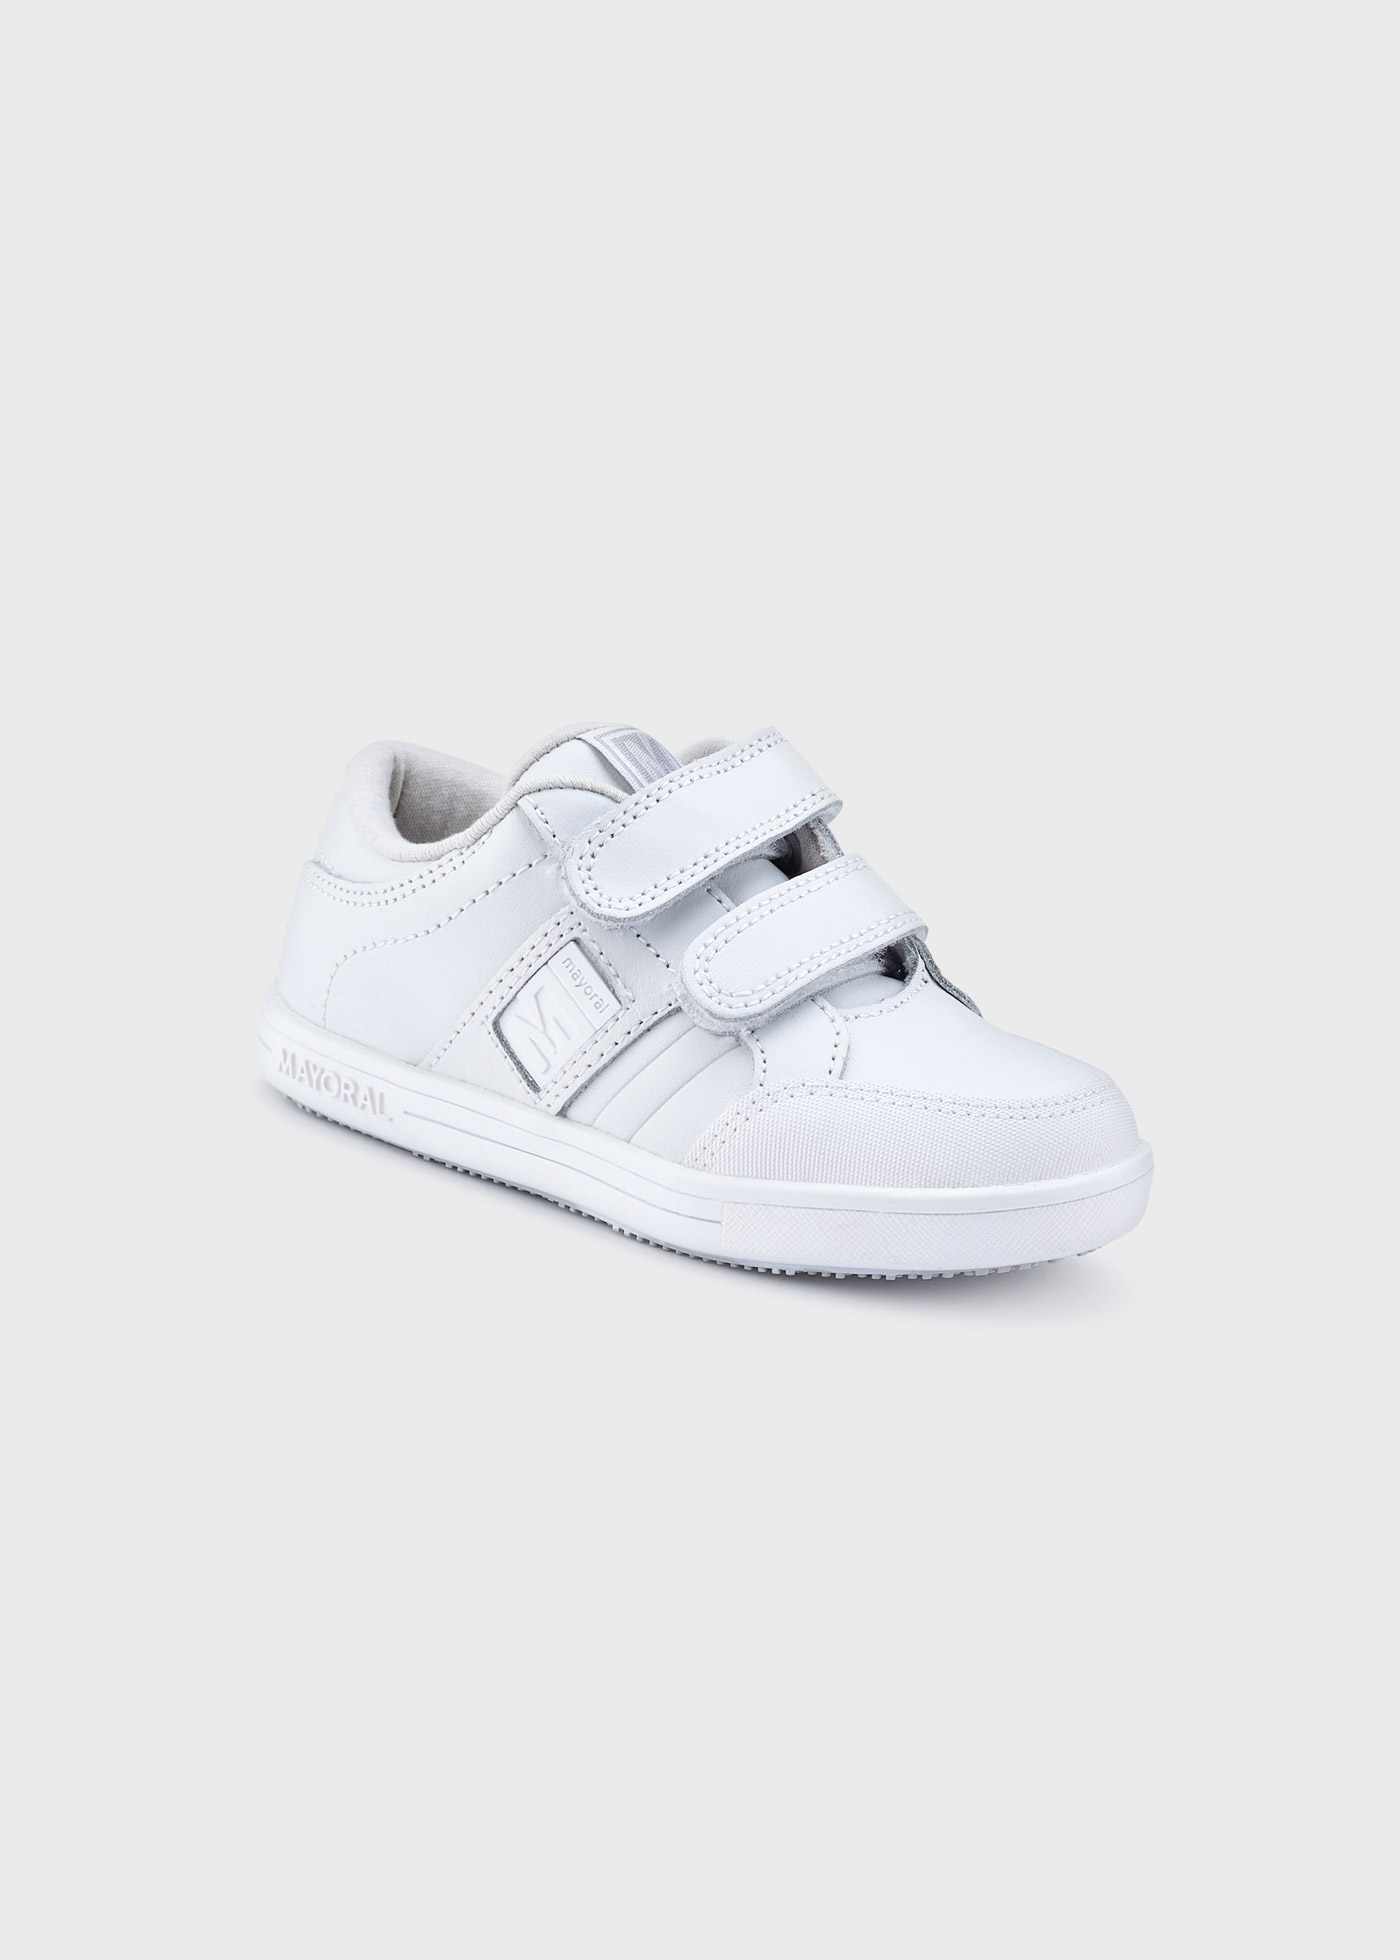 School shoes casual style in white | Mayoral